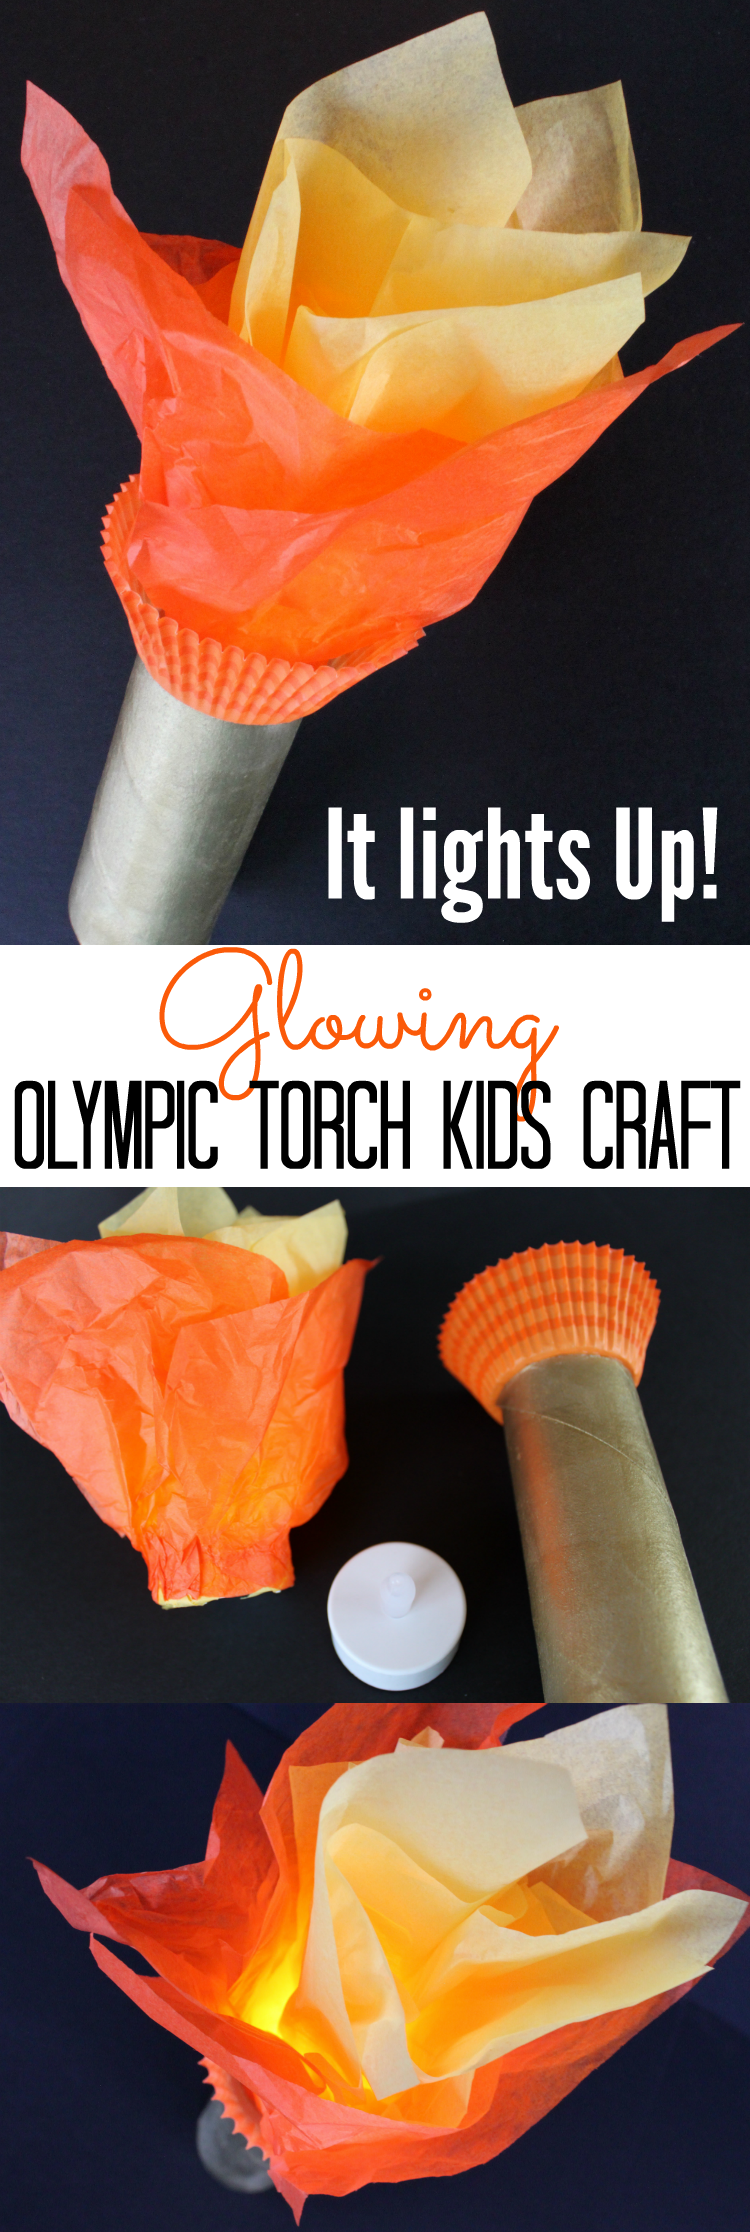 IT LIGHTS UP! Glowing Tealight Olympic Torch Kids Craft for the Summer Olympics and Winter Olympics games - A great toilet paper roll craft for kids to hold during the Olympic Opening Ceremony! | OHMY-CREATIVE.COM